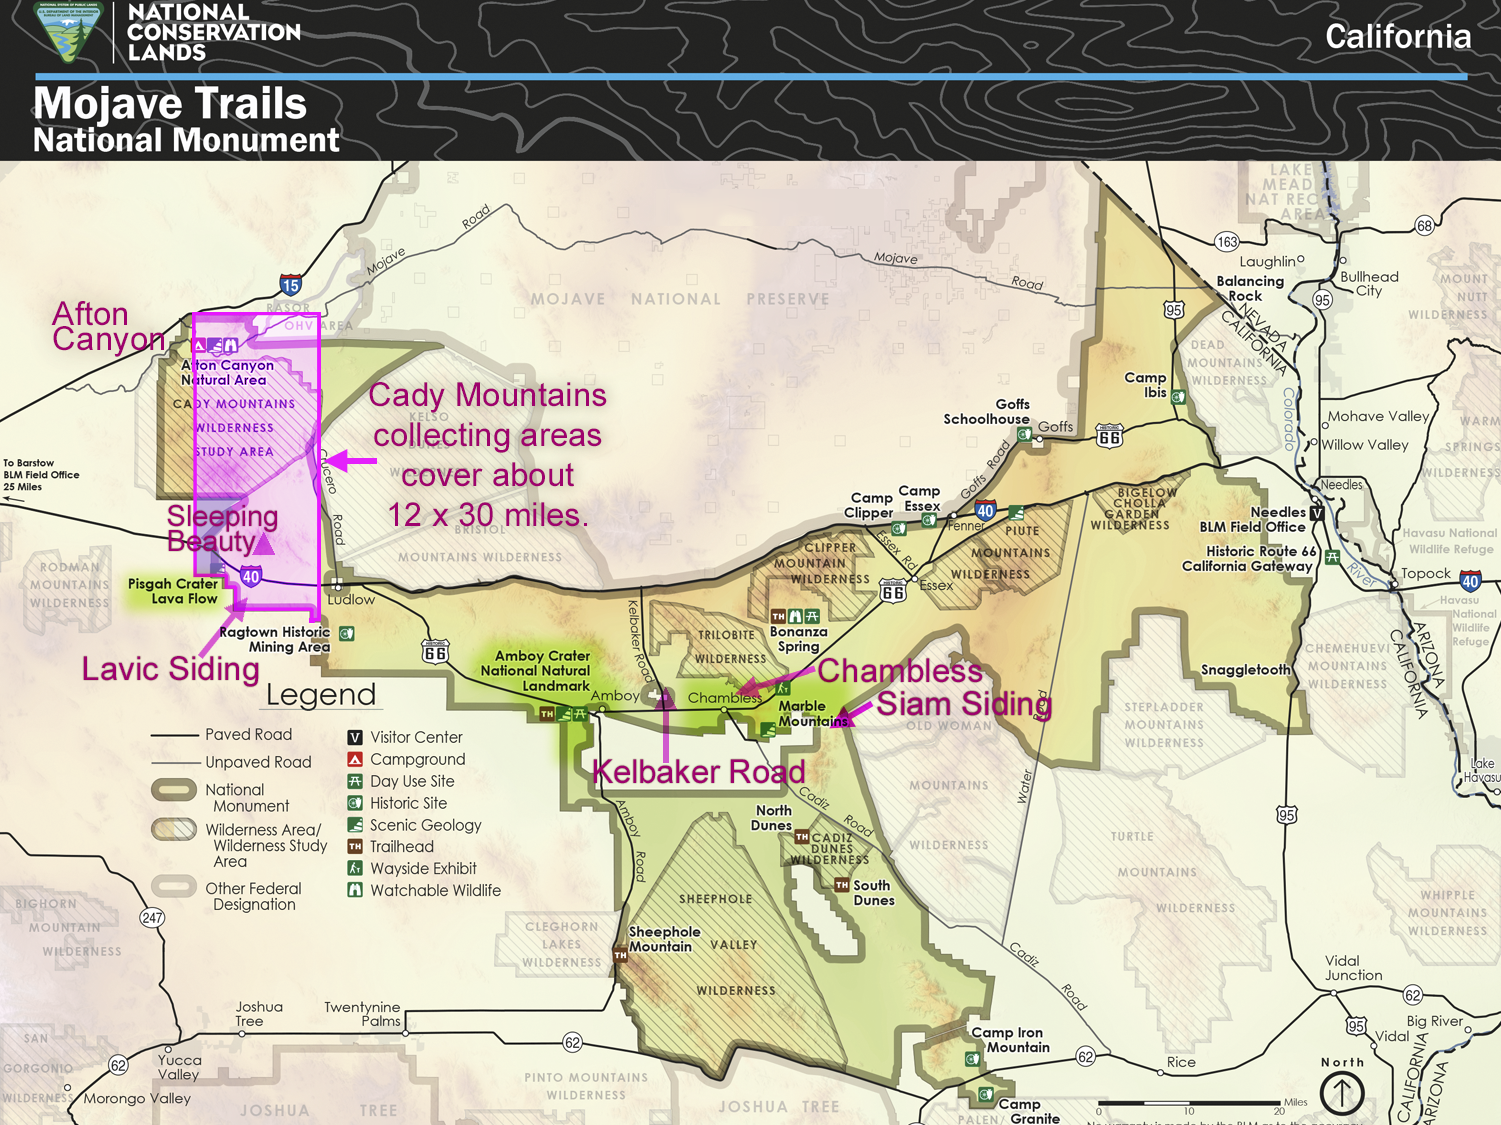 Mojave Trails National Monument map with collecting areas